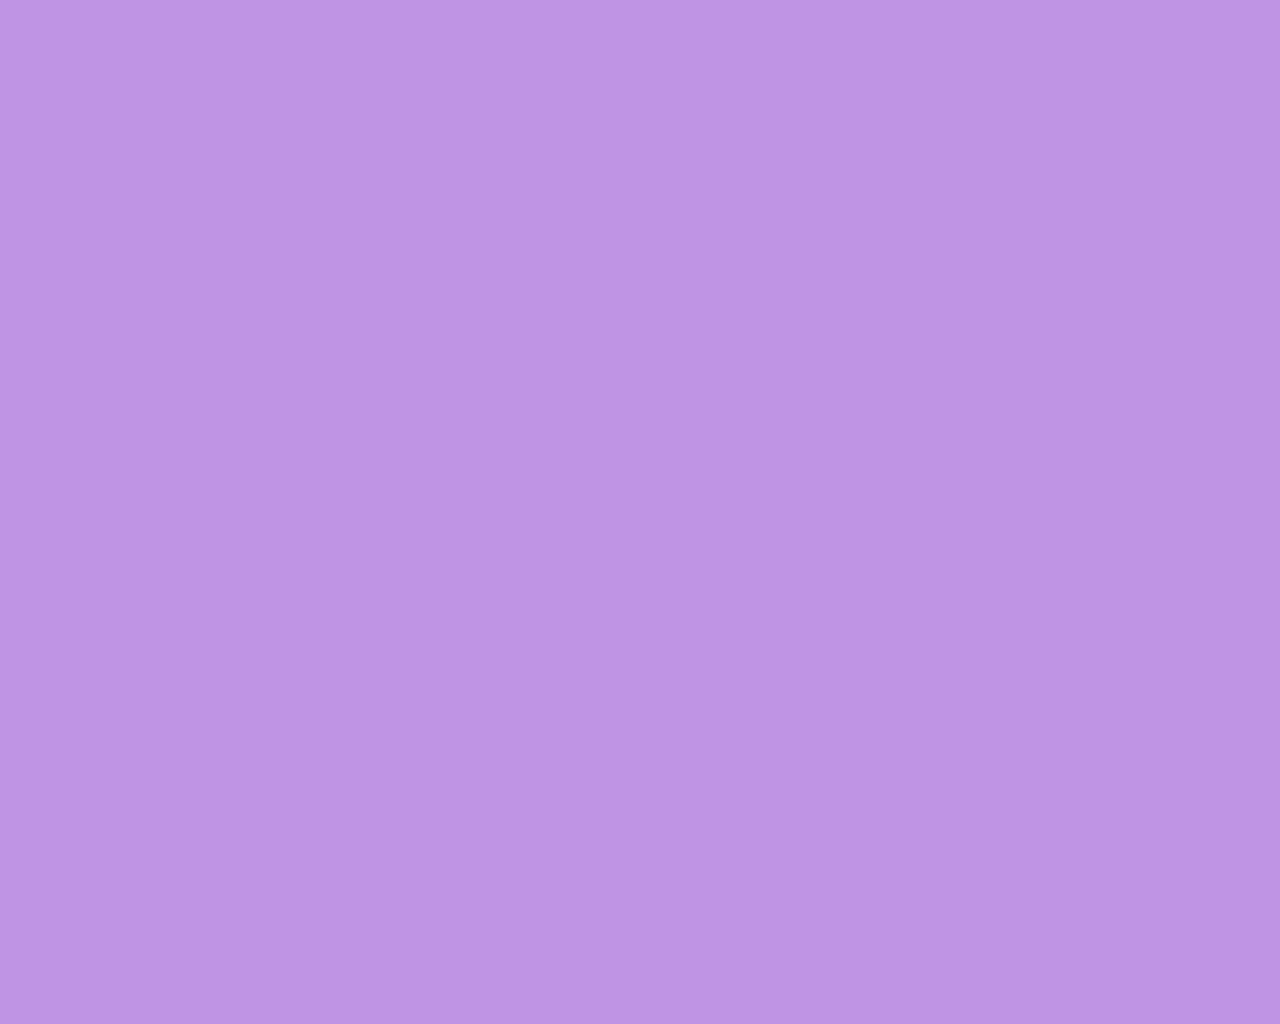 Free 1280x1024 resolution Bright Lavender solid color background view